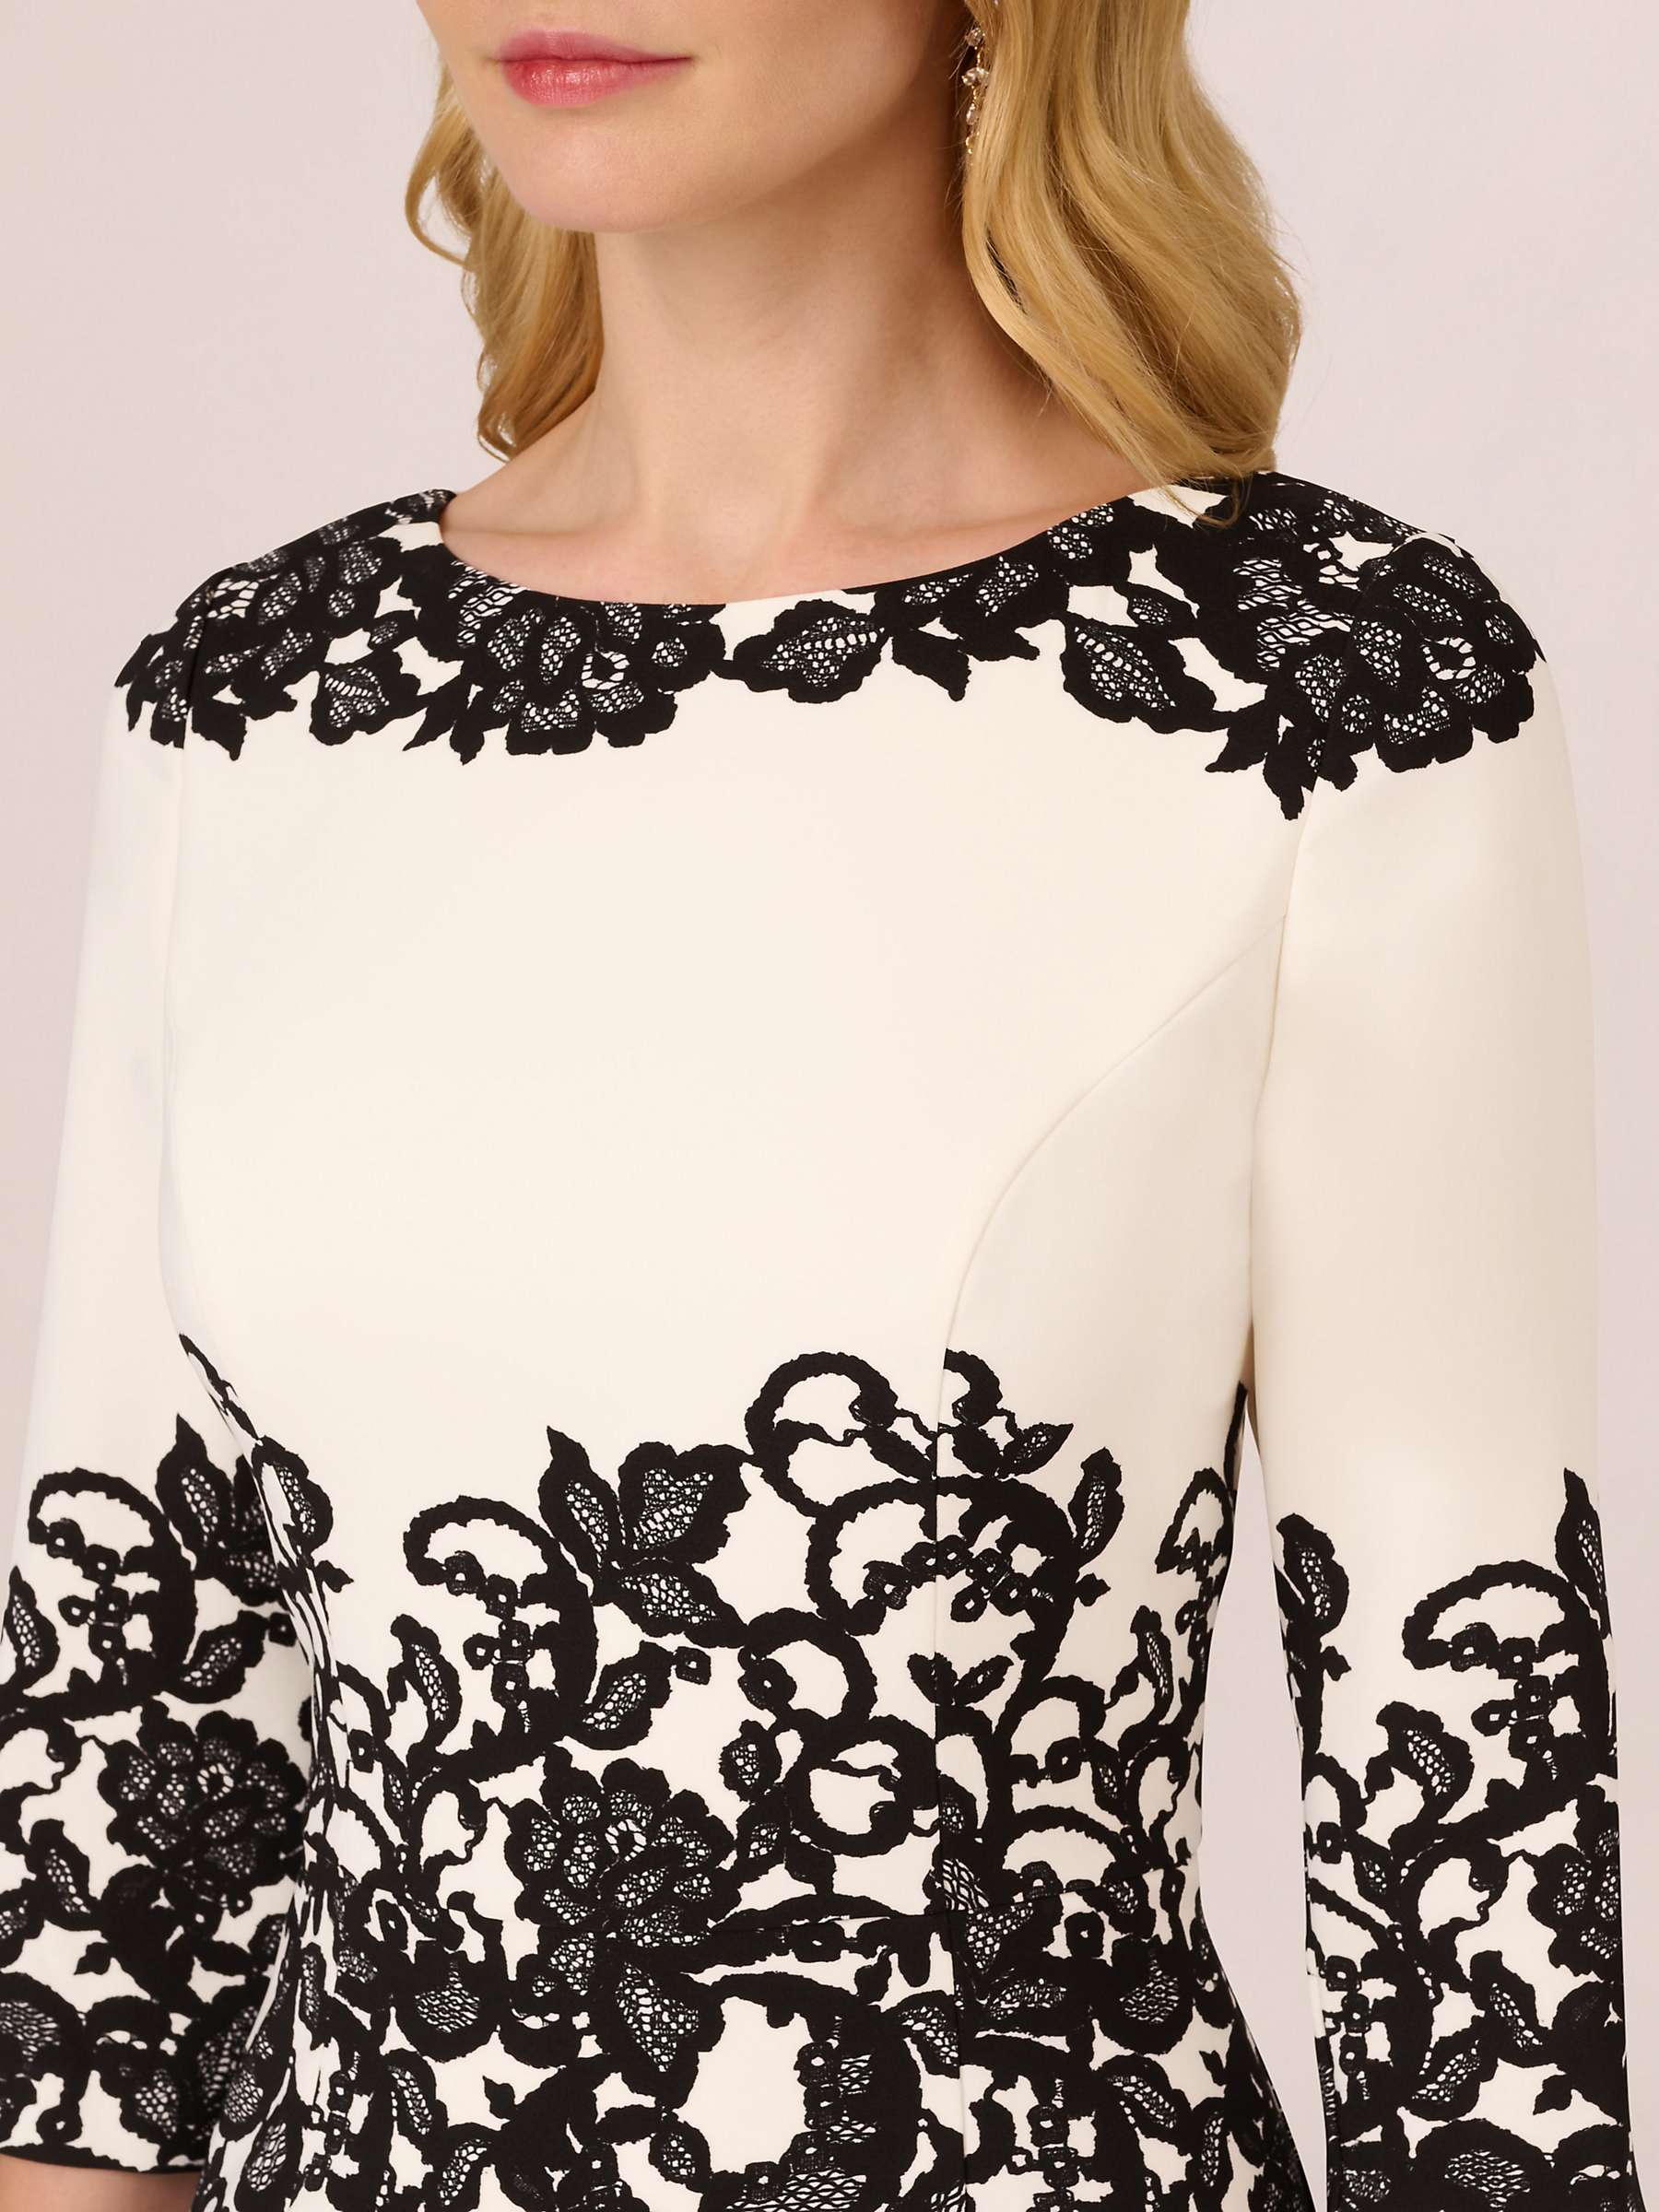 Buy Adrianna Papell Scroll Lace Short Dress, Ivory/Black Online at johnlewis.com